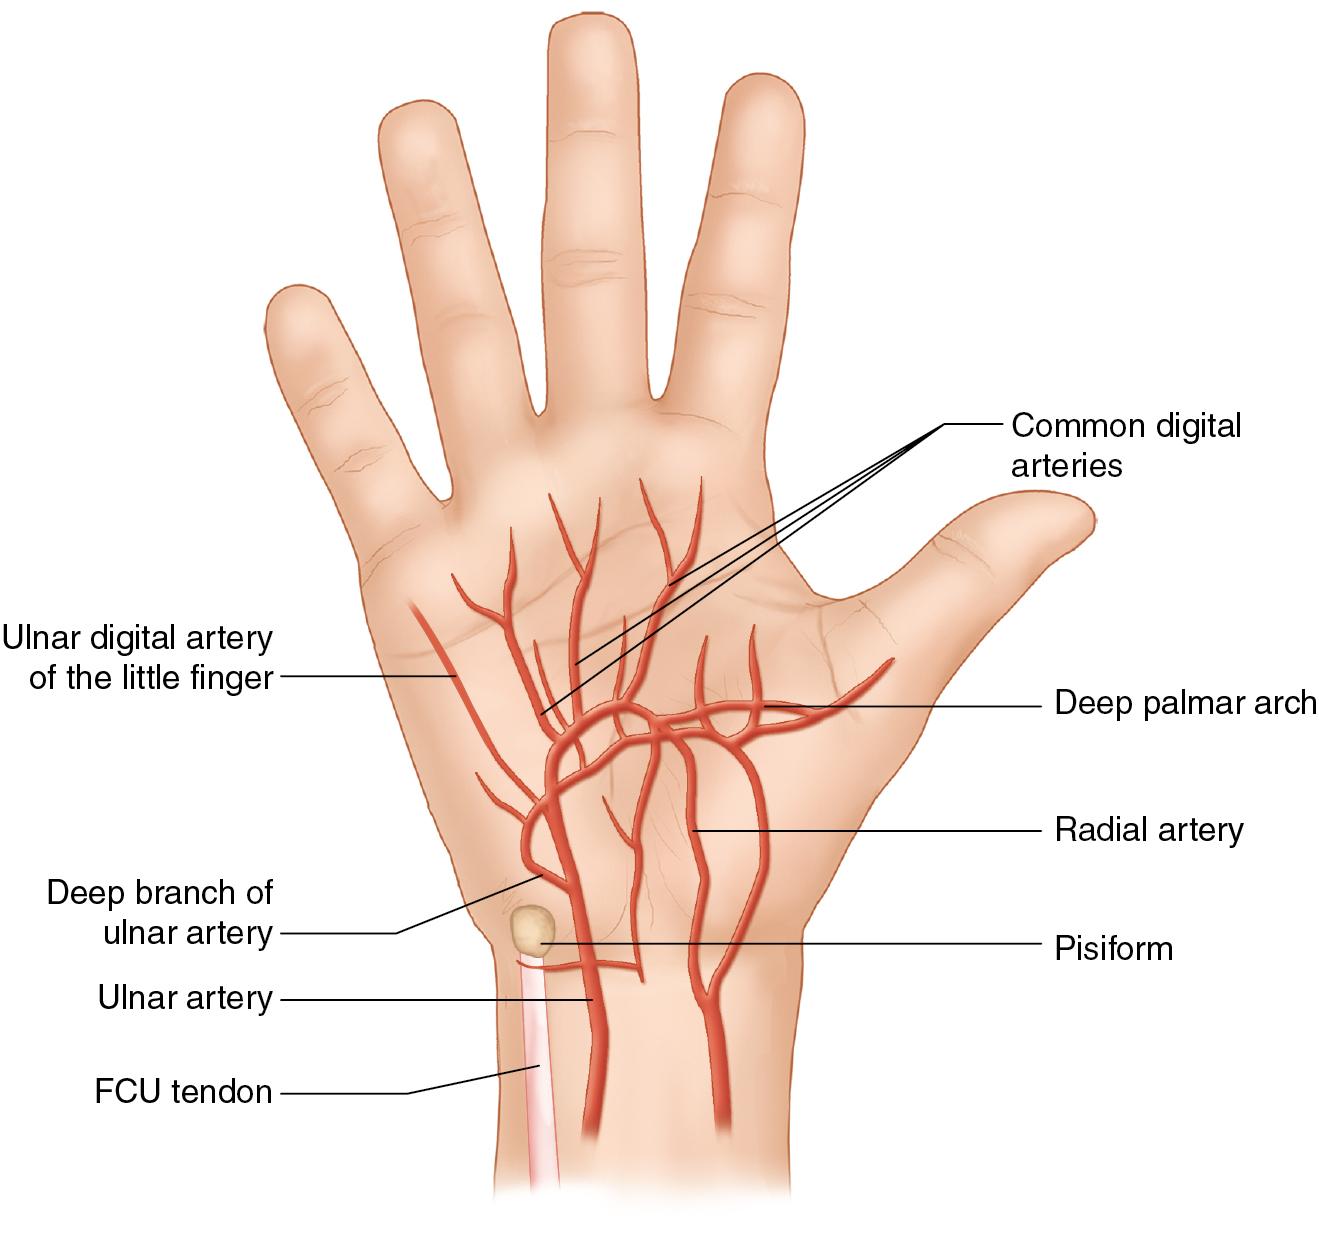 FIGURE 97.3, The superficial arch, and therefore the ulnar artery, gives rise to the finger’s digital arteries. The ulnar artery gives off the ulnar digital artery to the little finger and three common digital arteries at the level of the metacarpophalangeal joint.